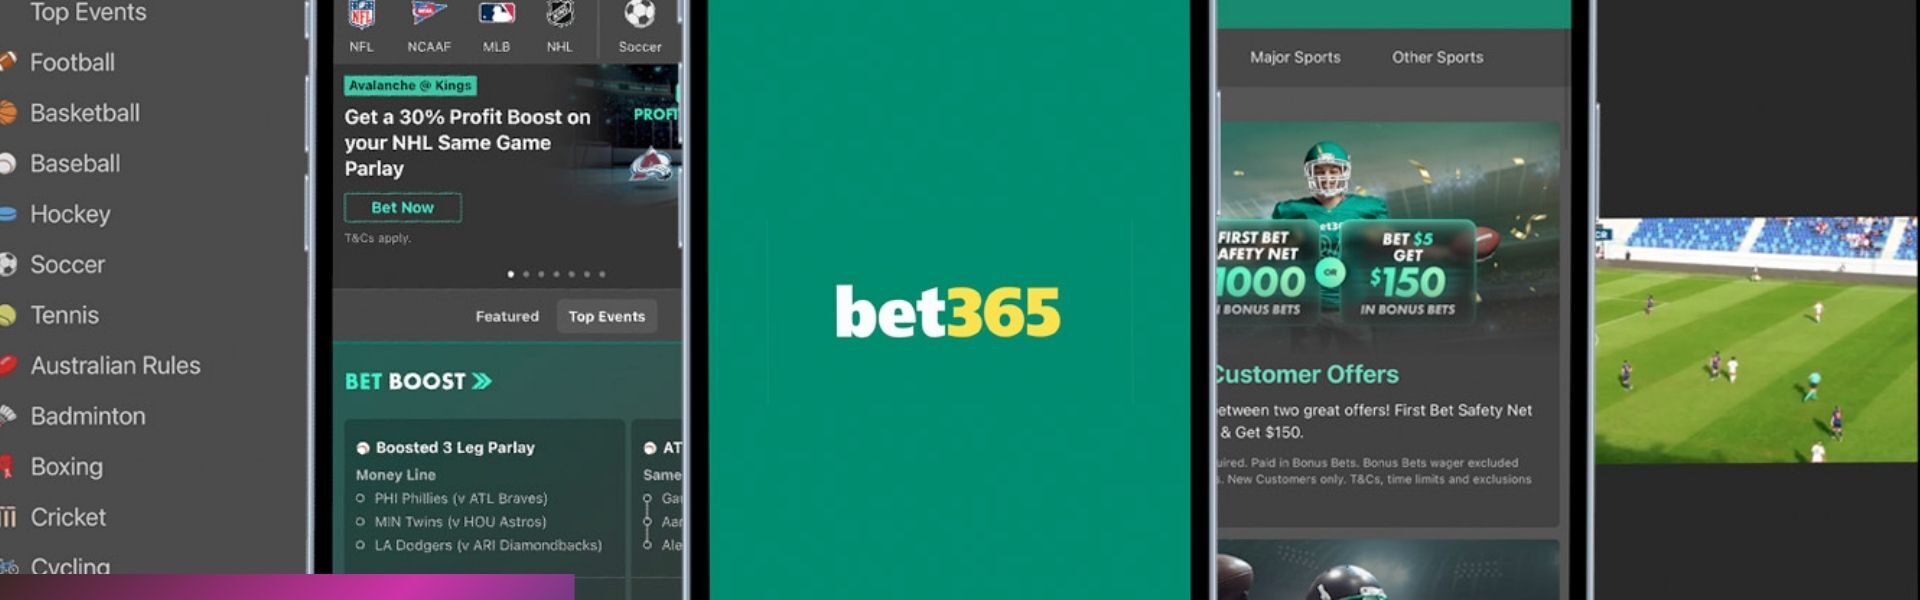 Mobile Bet365 Apps Apk Download and Login on Android